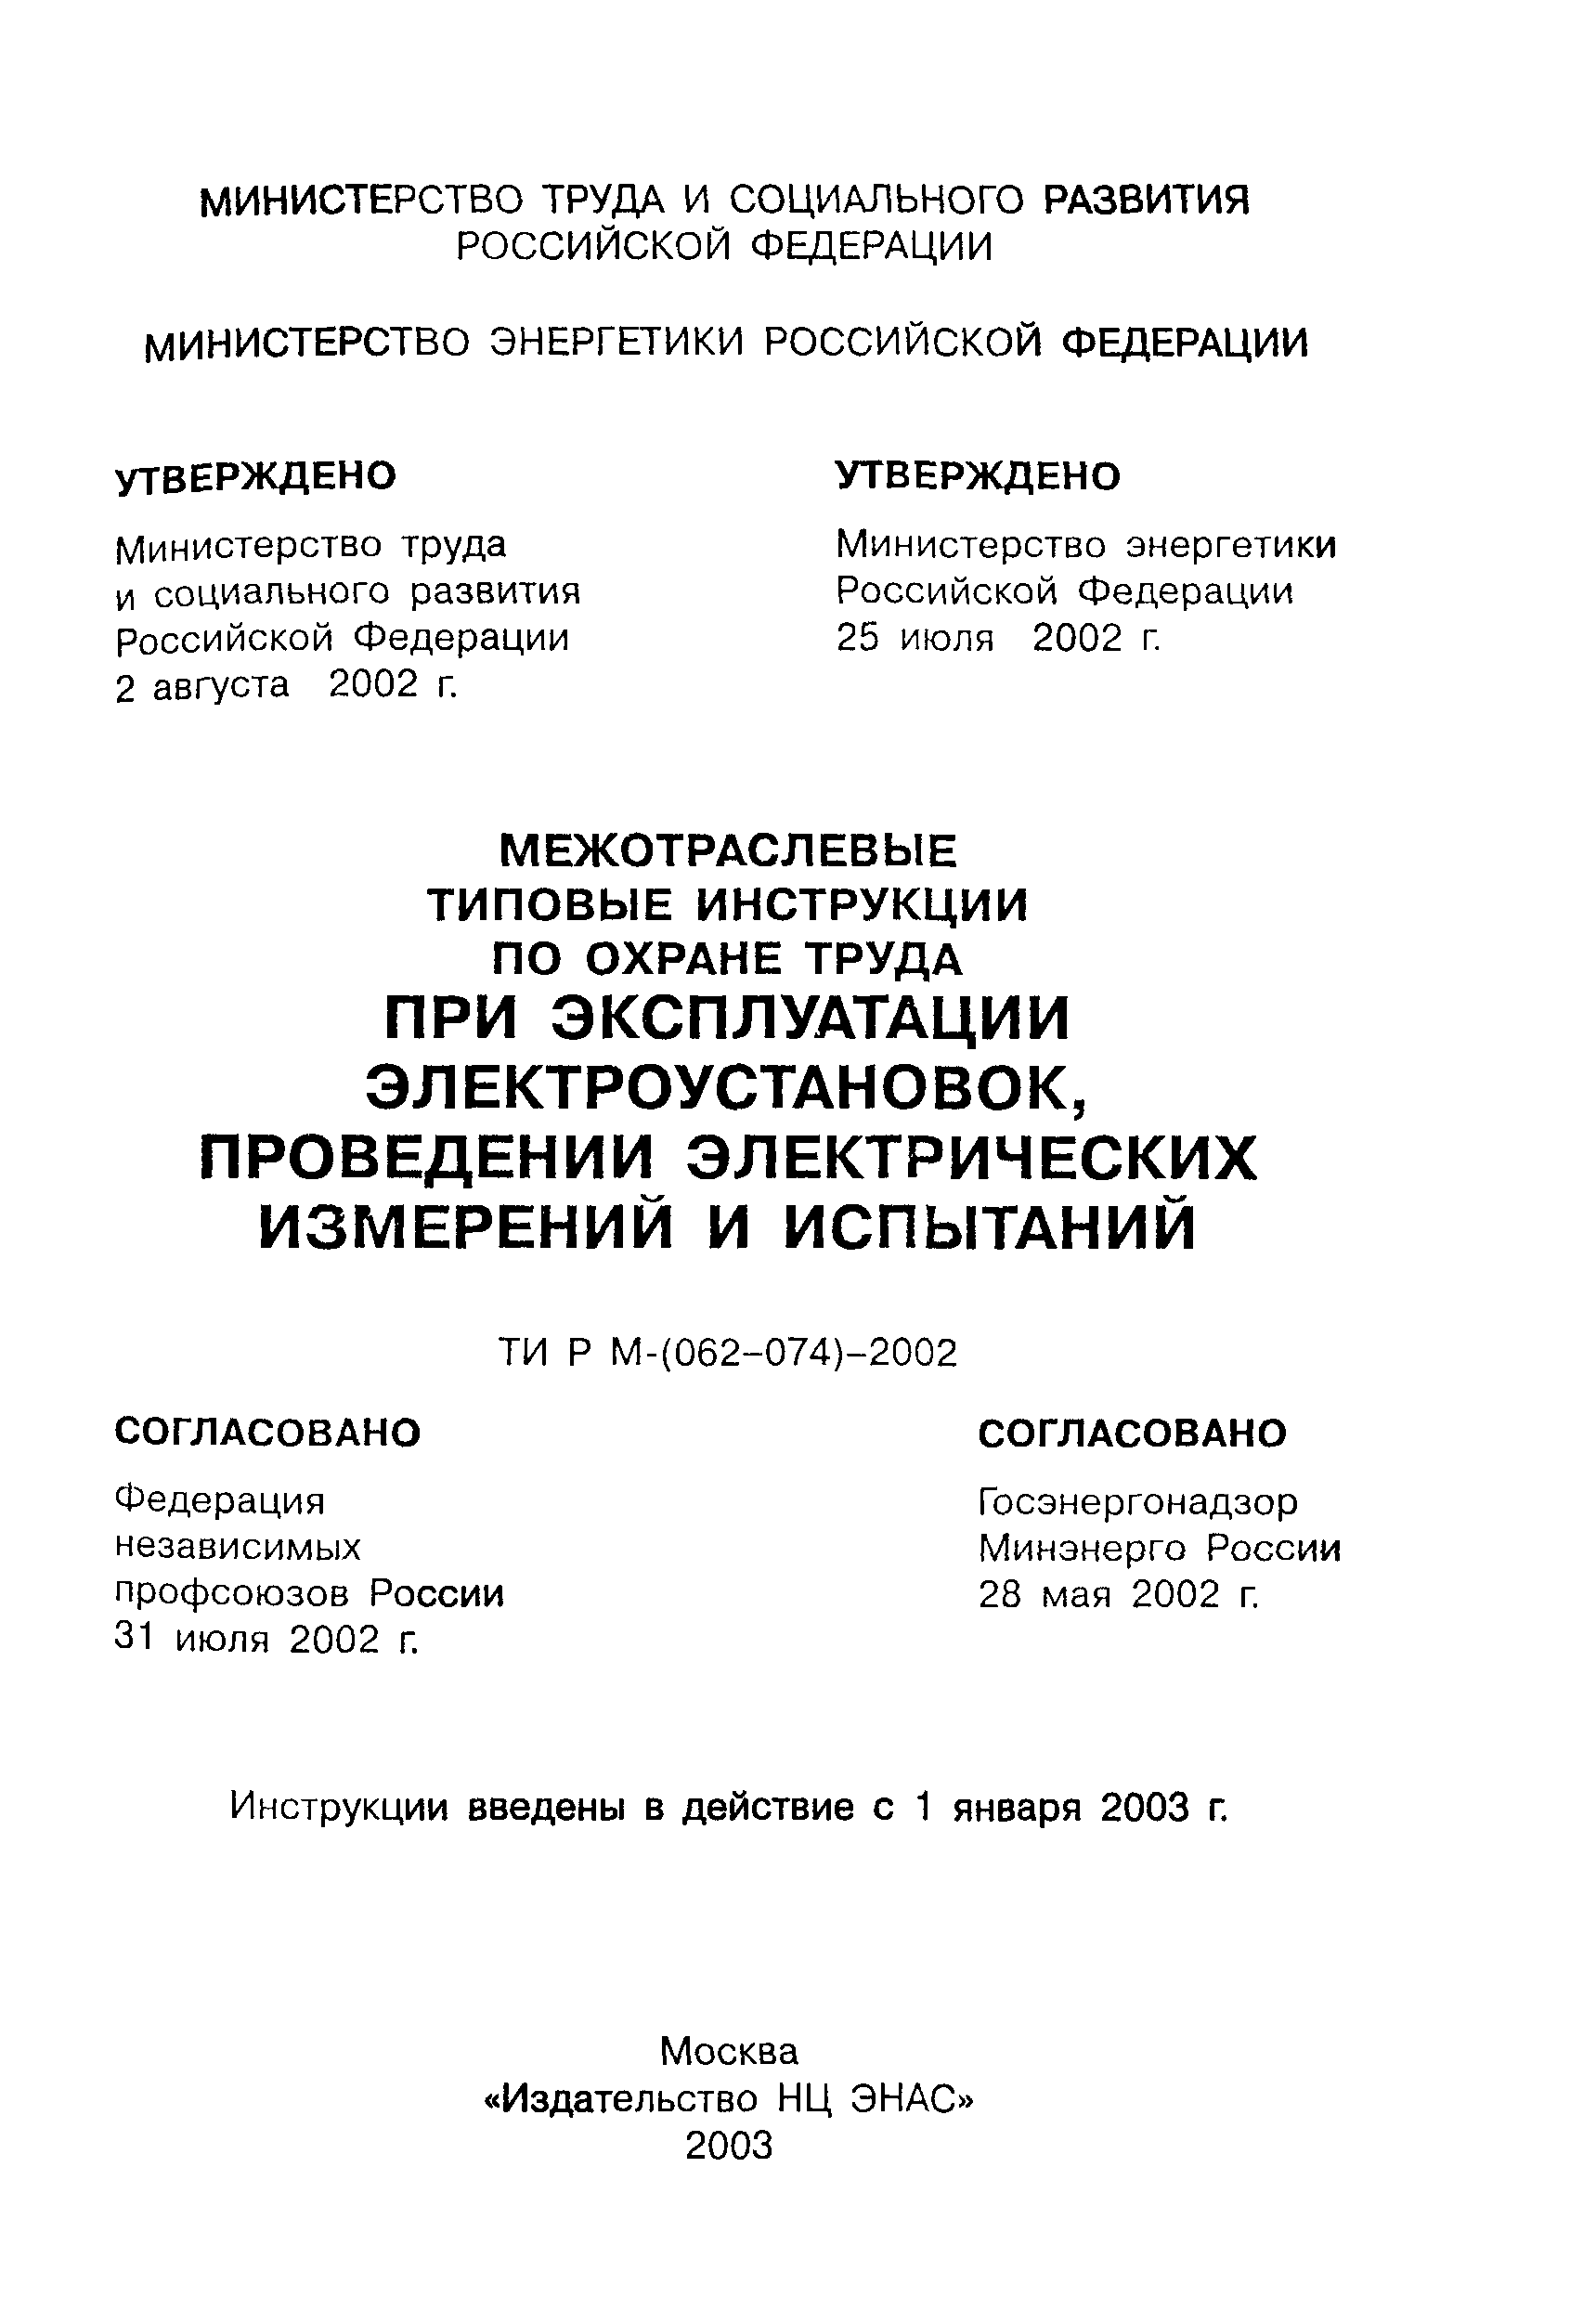 ТИ Р М-069-2002